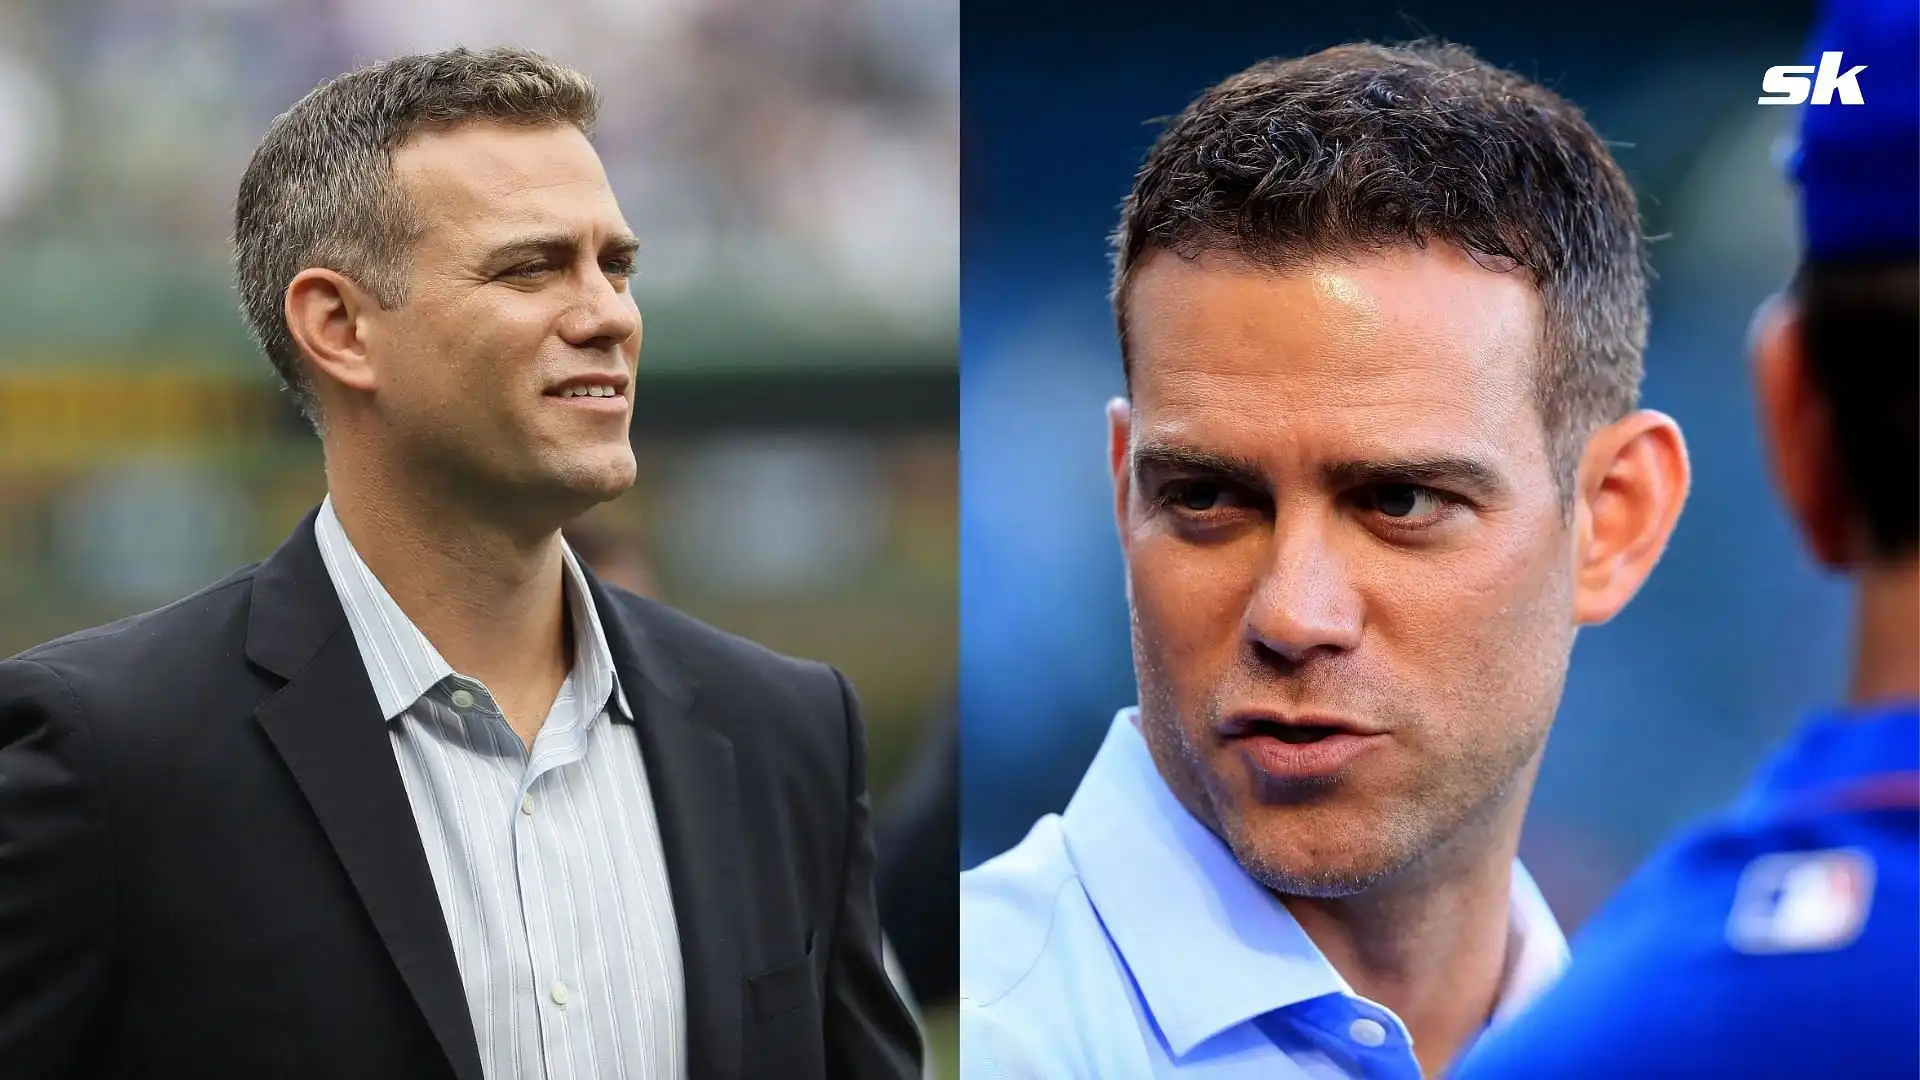 Theo Epstein's wife: A glimpse into personal life of ex-Red Sox GM and new co-owner of FSG